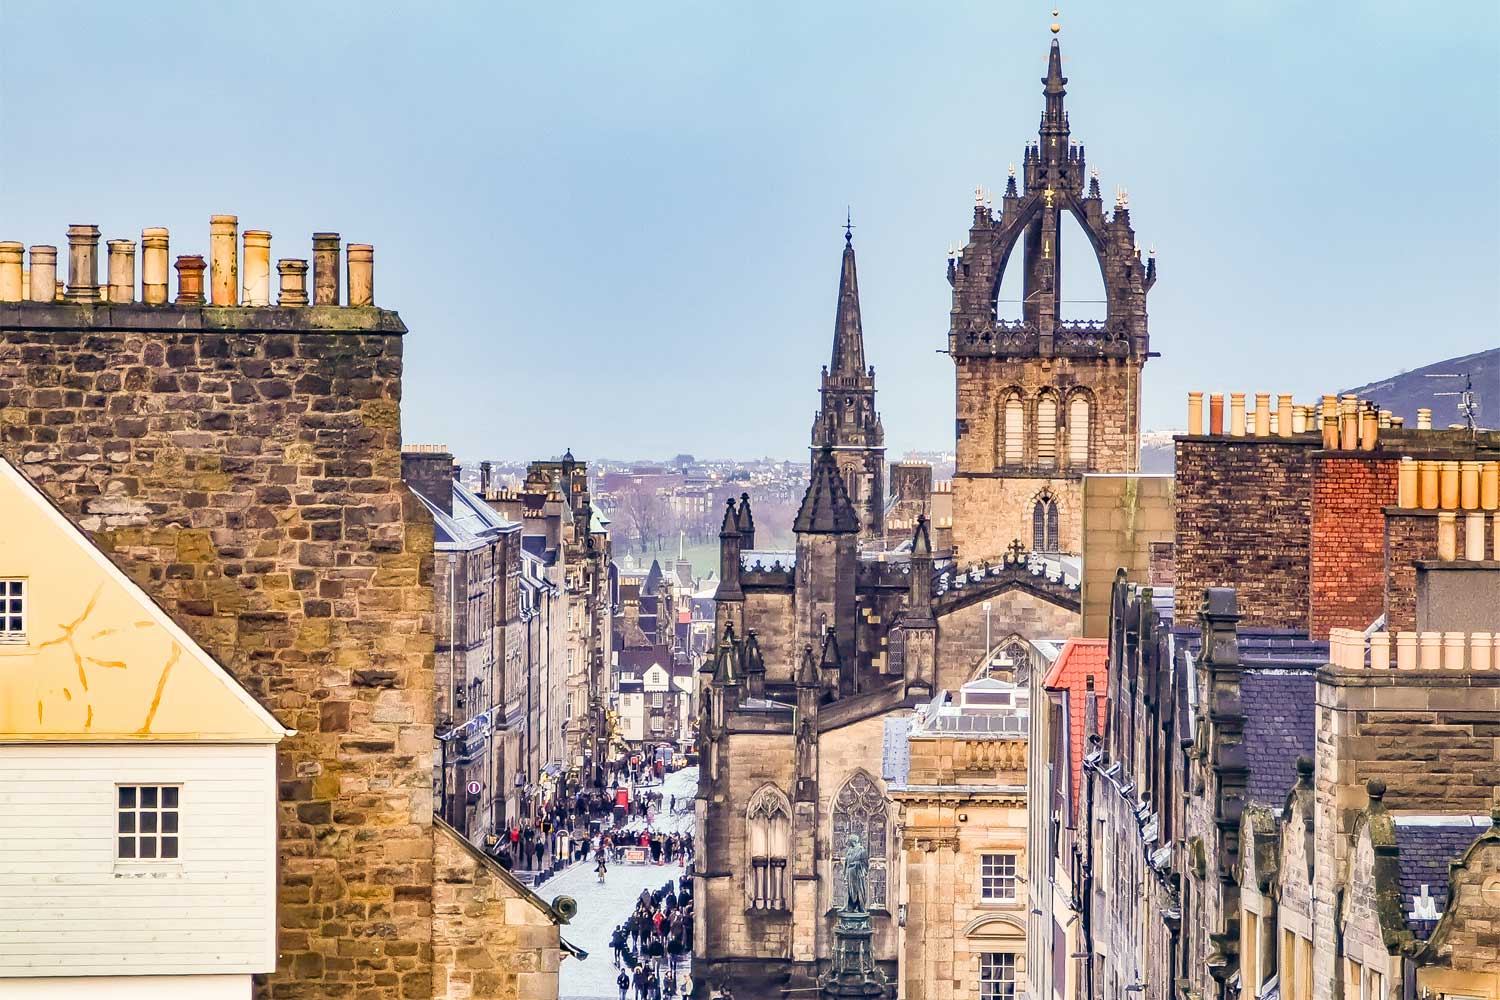 the royal mile in Edinburgh as seen from Castle Esplanade. A great place to visit during a vacation in edinburgh.